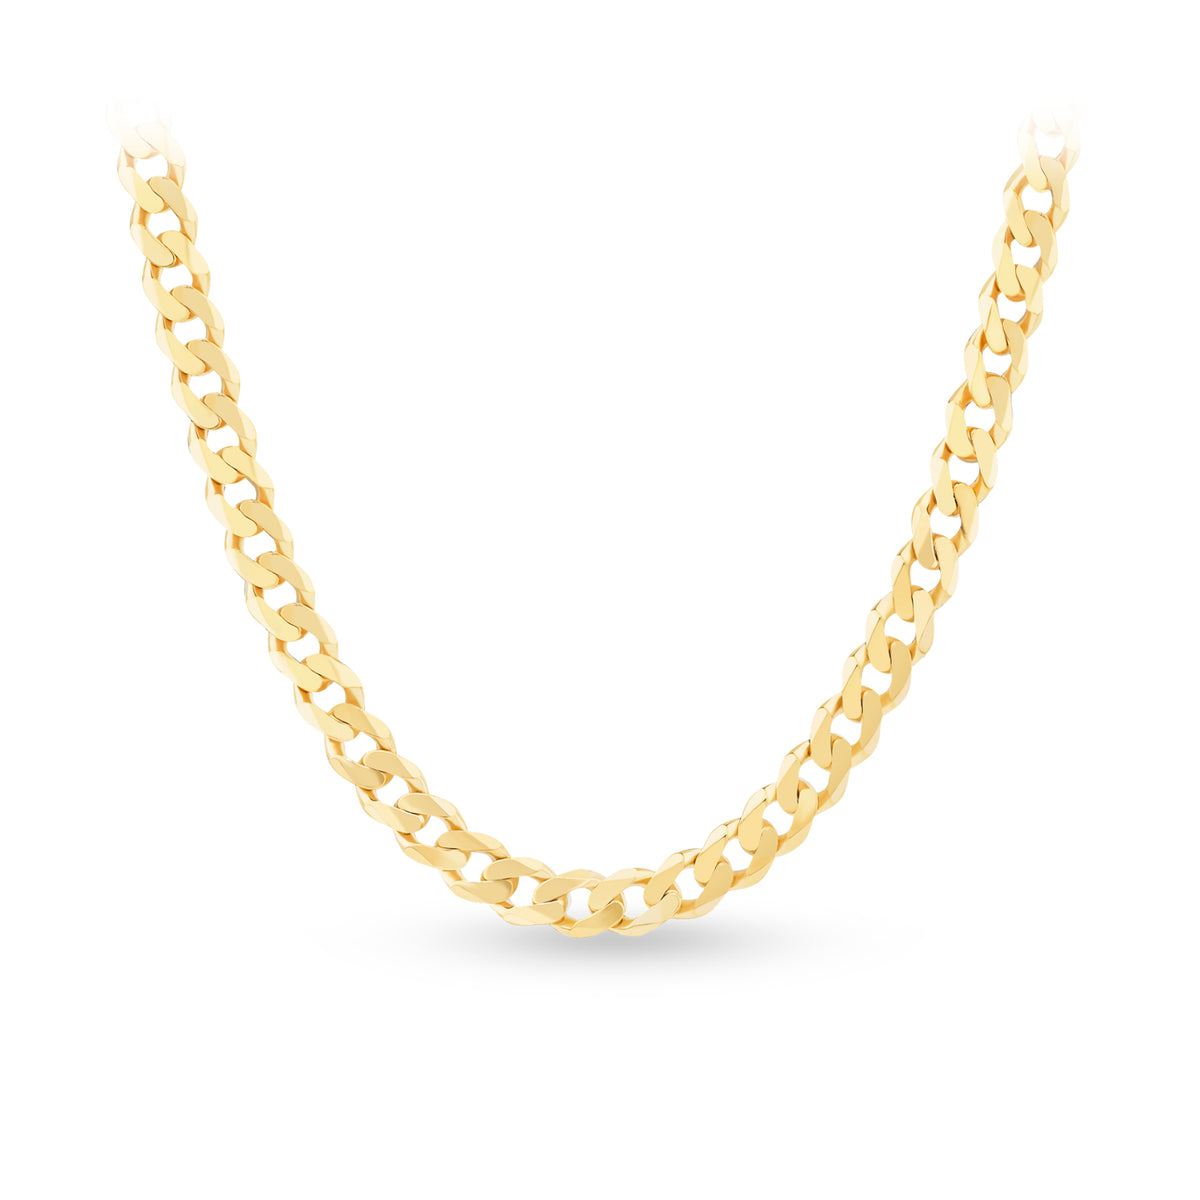 55cm Curb Link Chain in 9ct Yellow Gold